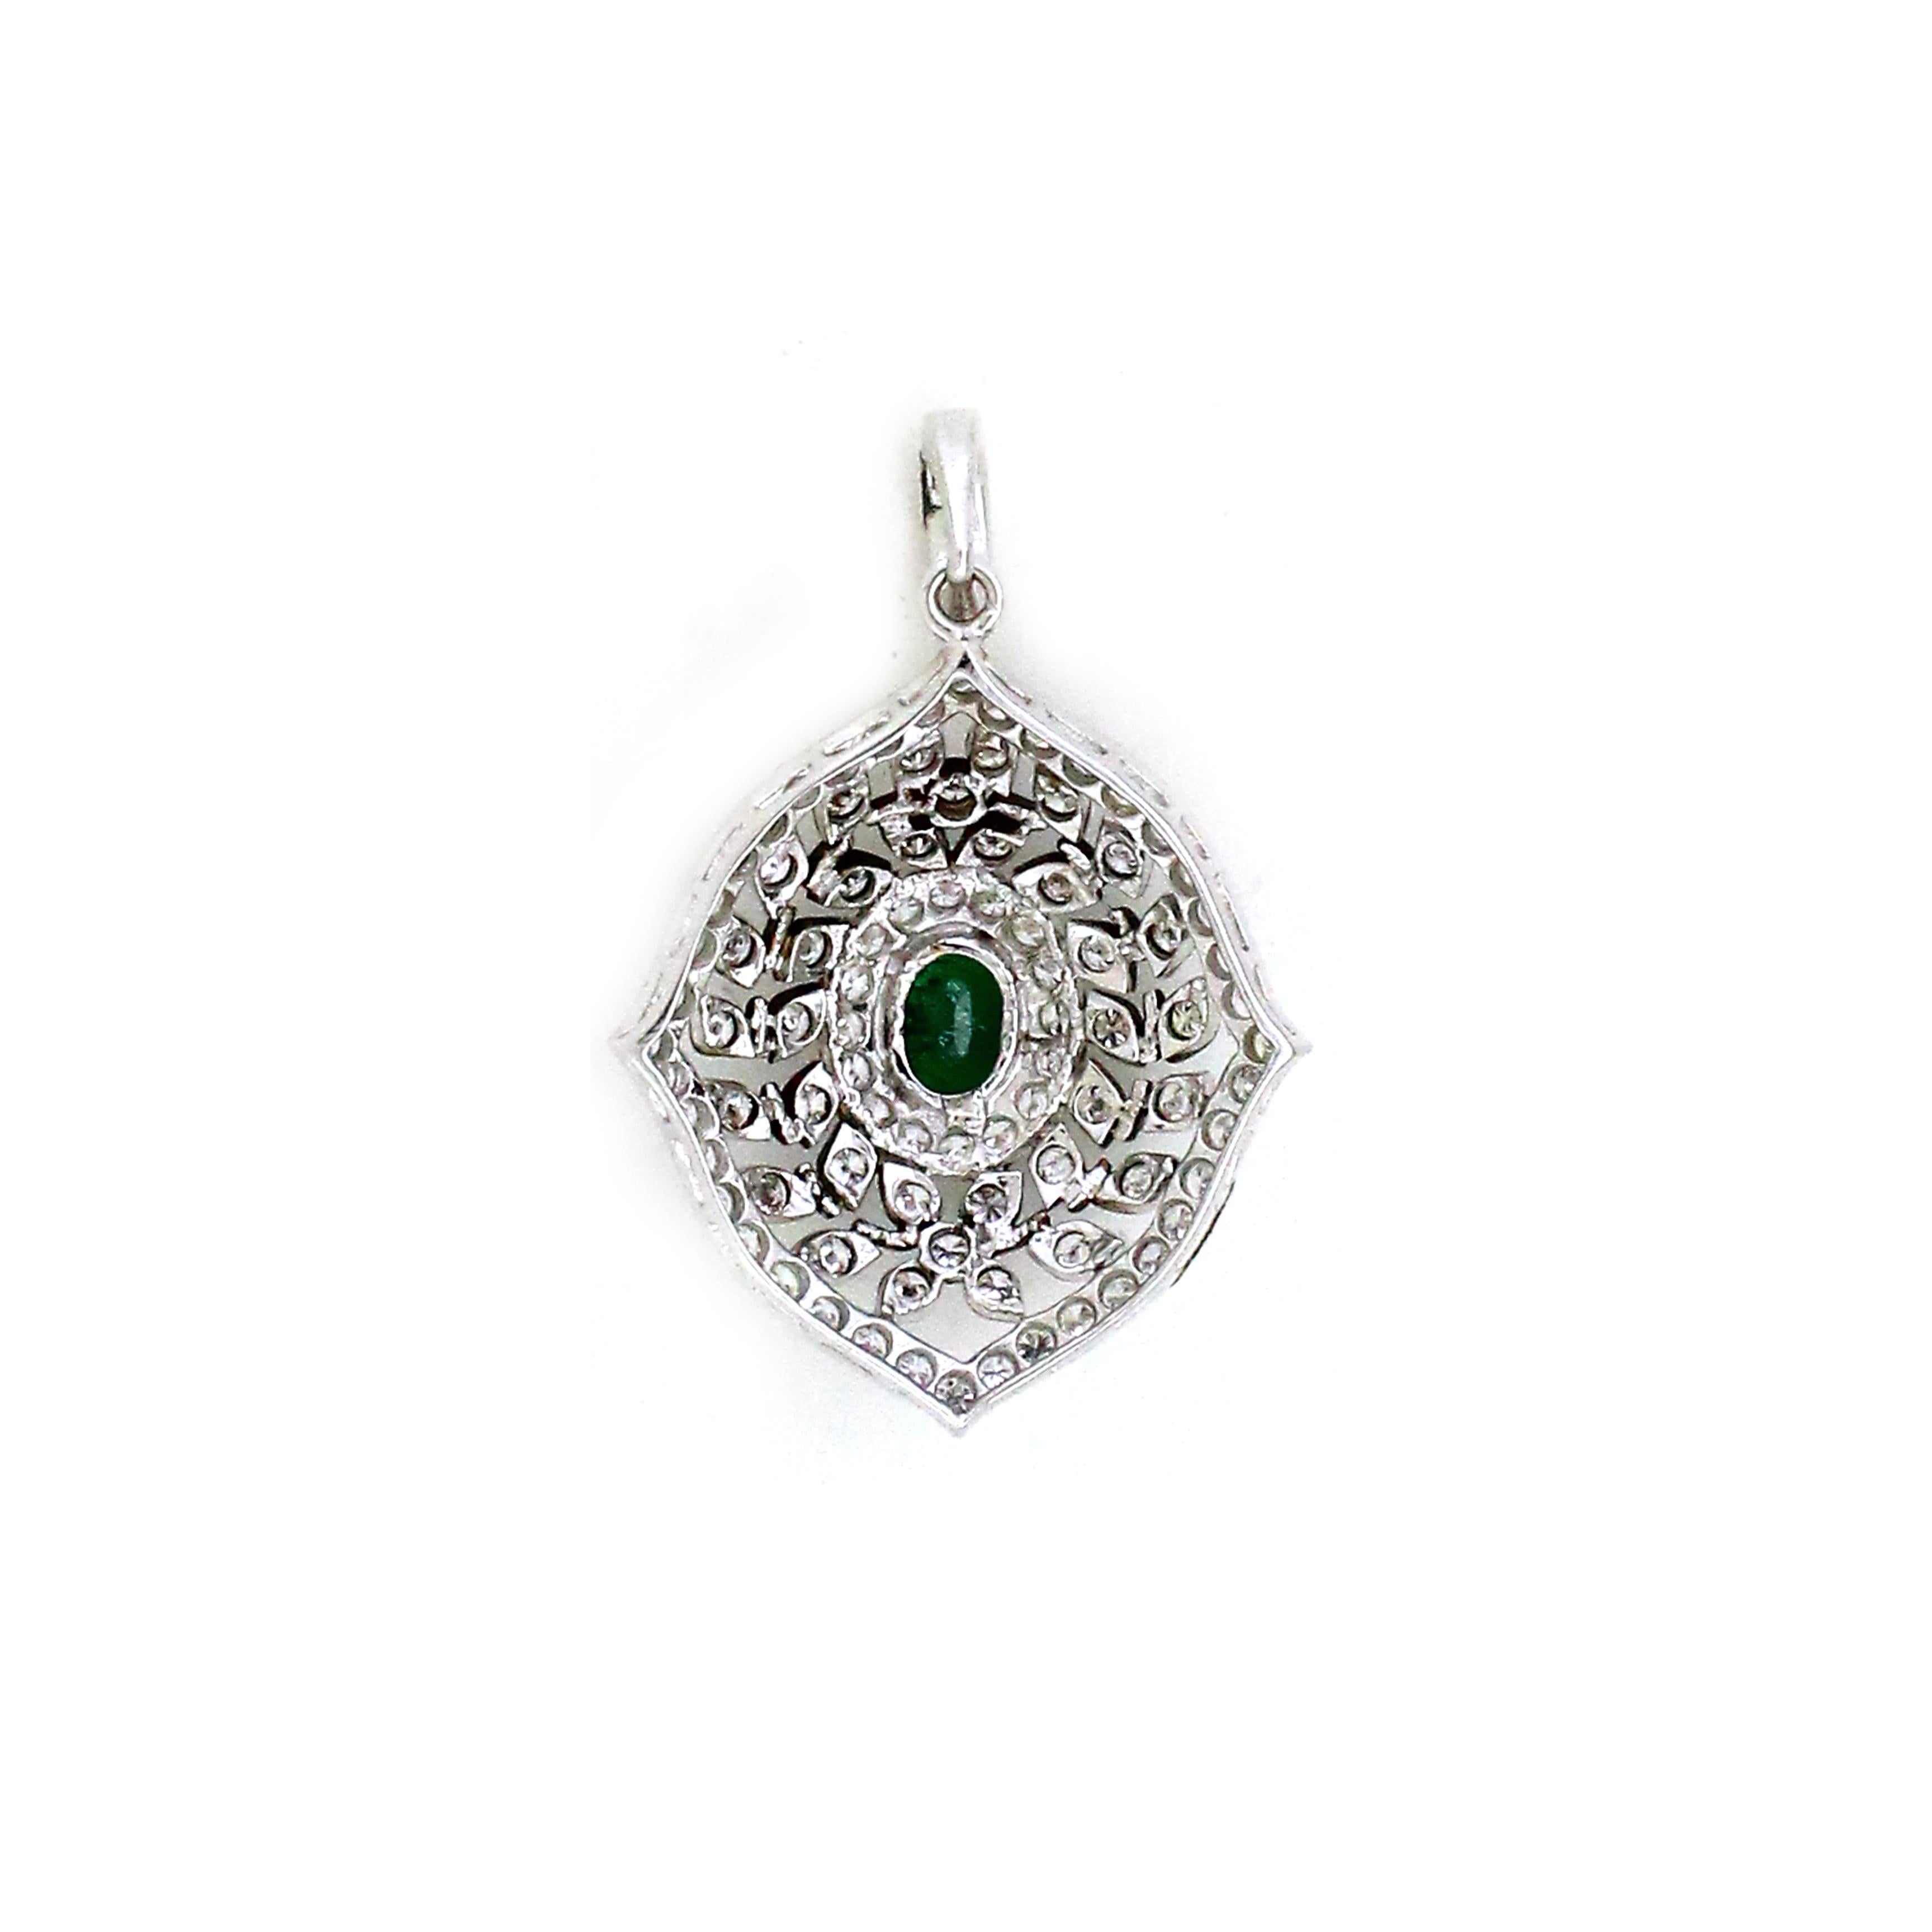 Oval Cut 1.5 carats of emerald Pendant For Sale